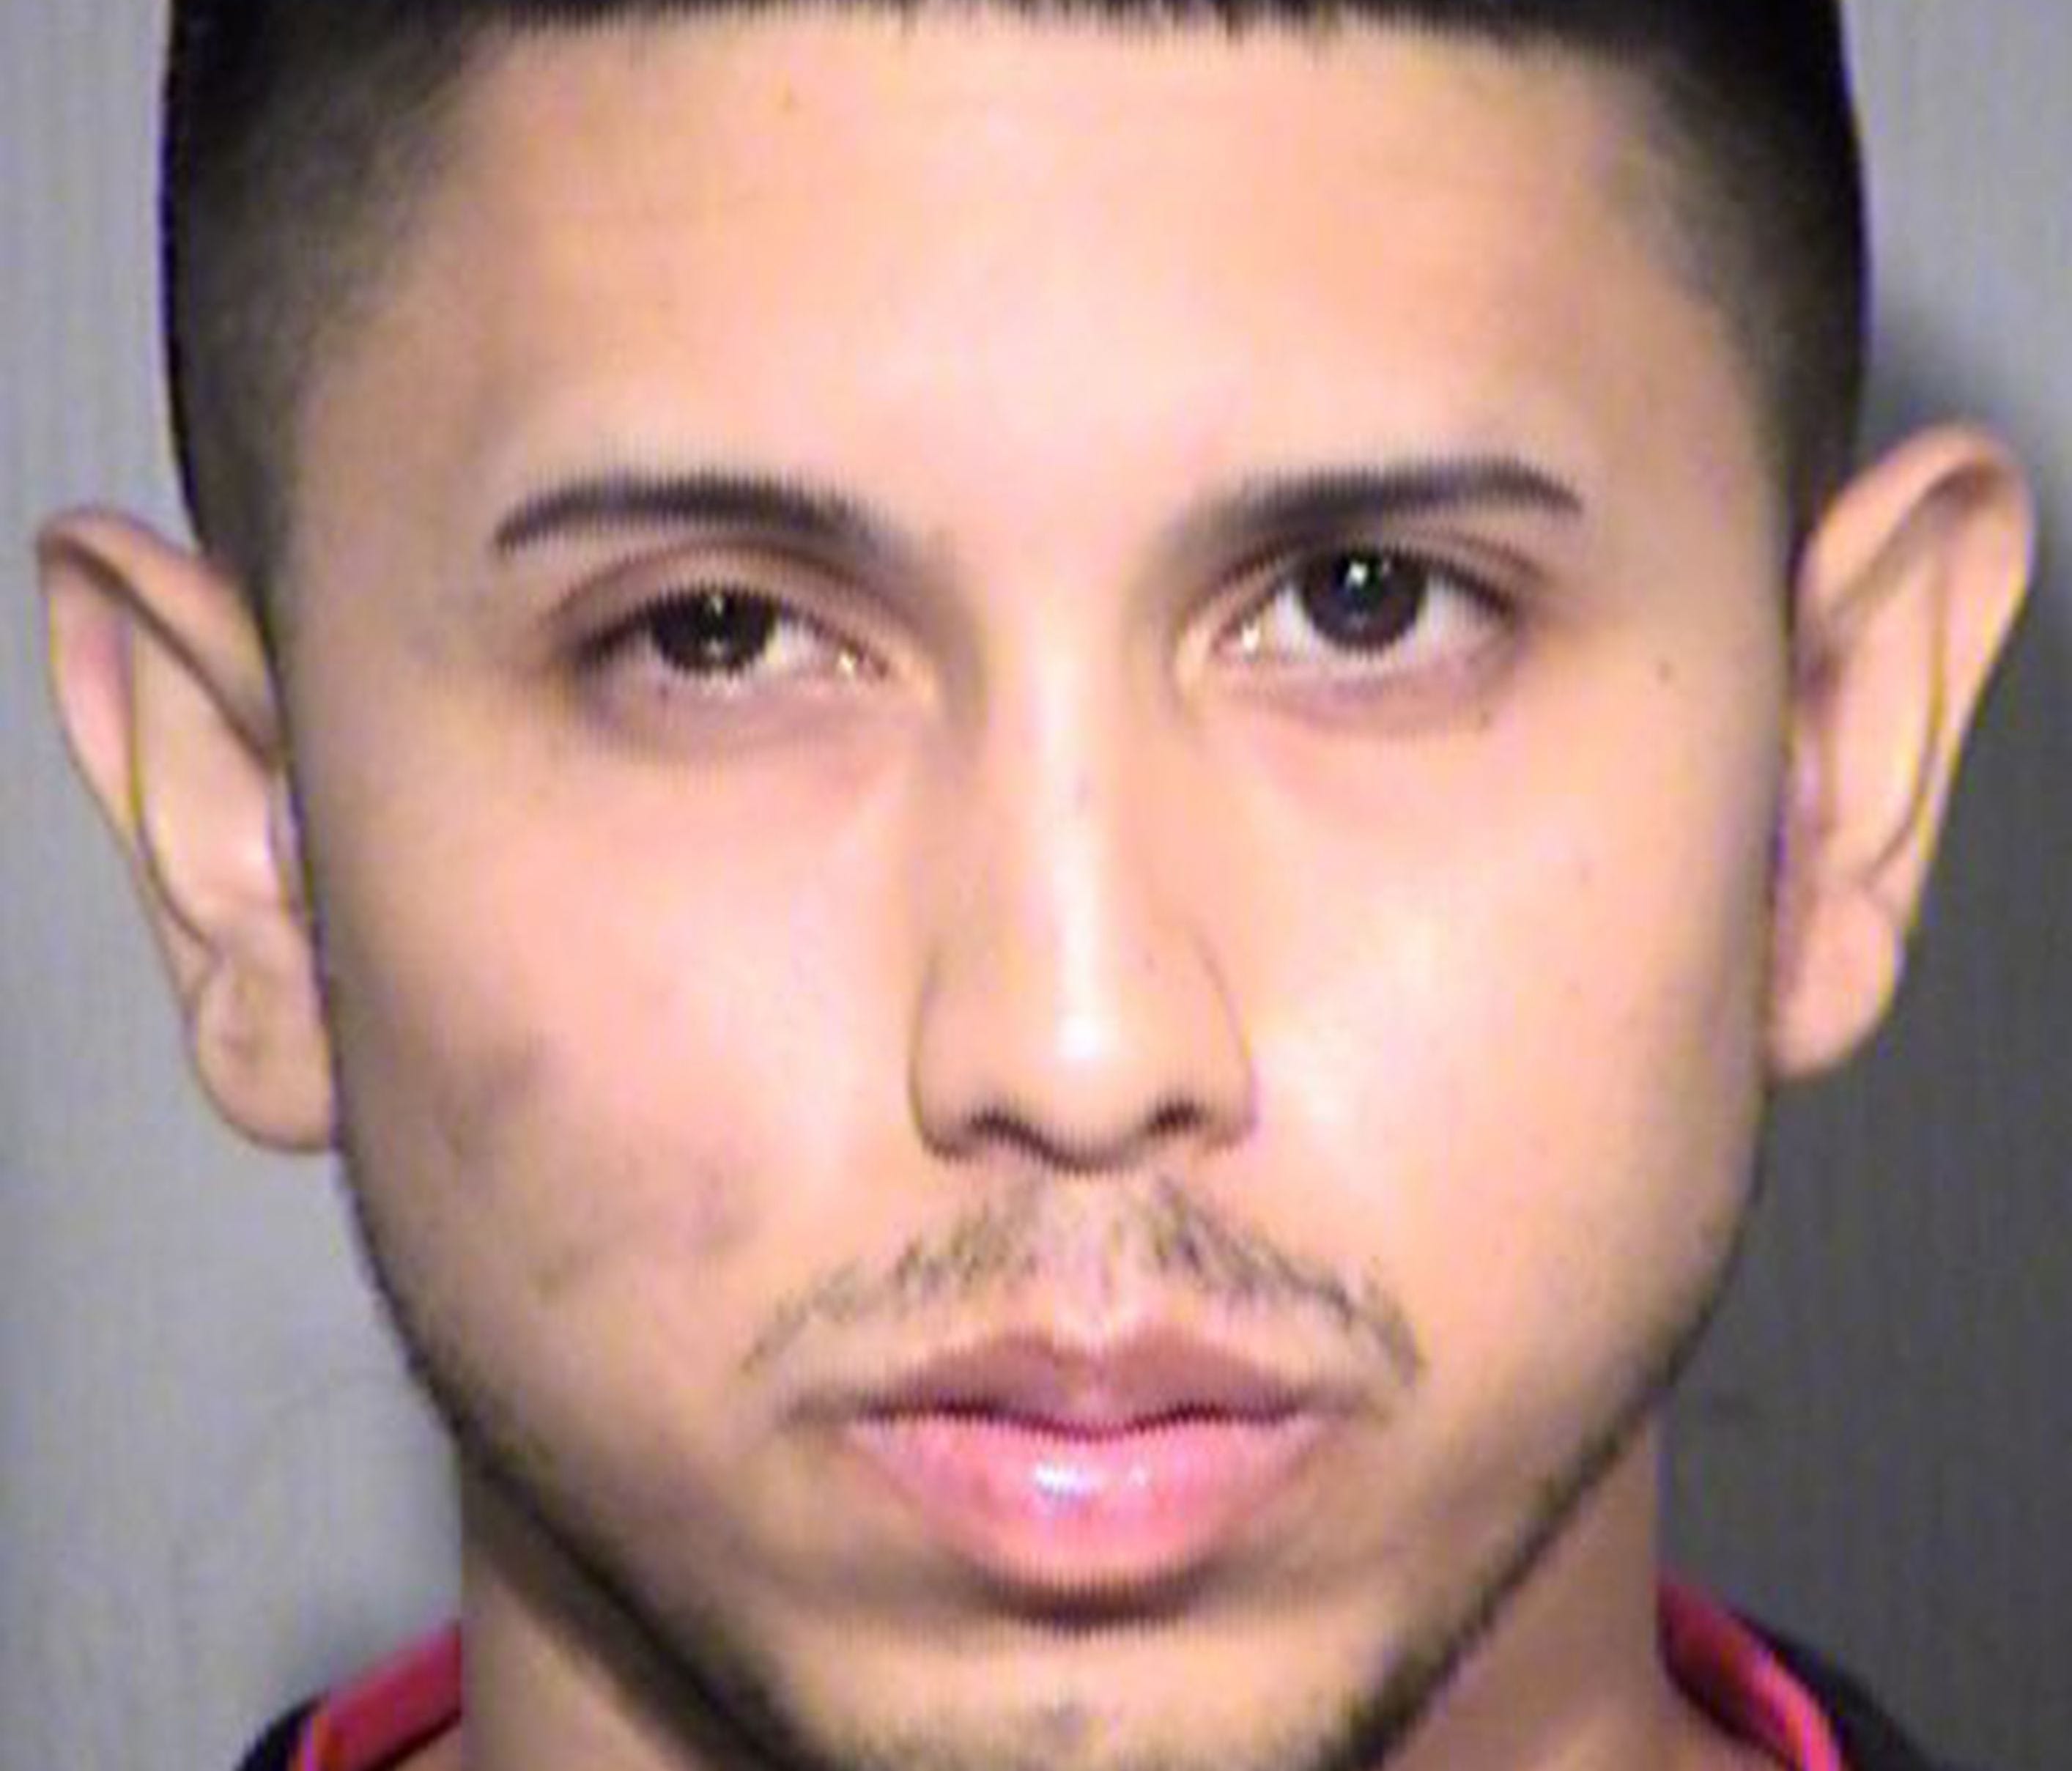 Aaron Saucedo, 23, of Phoenix is accused of being the Serial Street Shooter who gunned down 11 people, most in a series of shootings over four months in 2016.